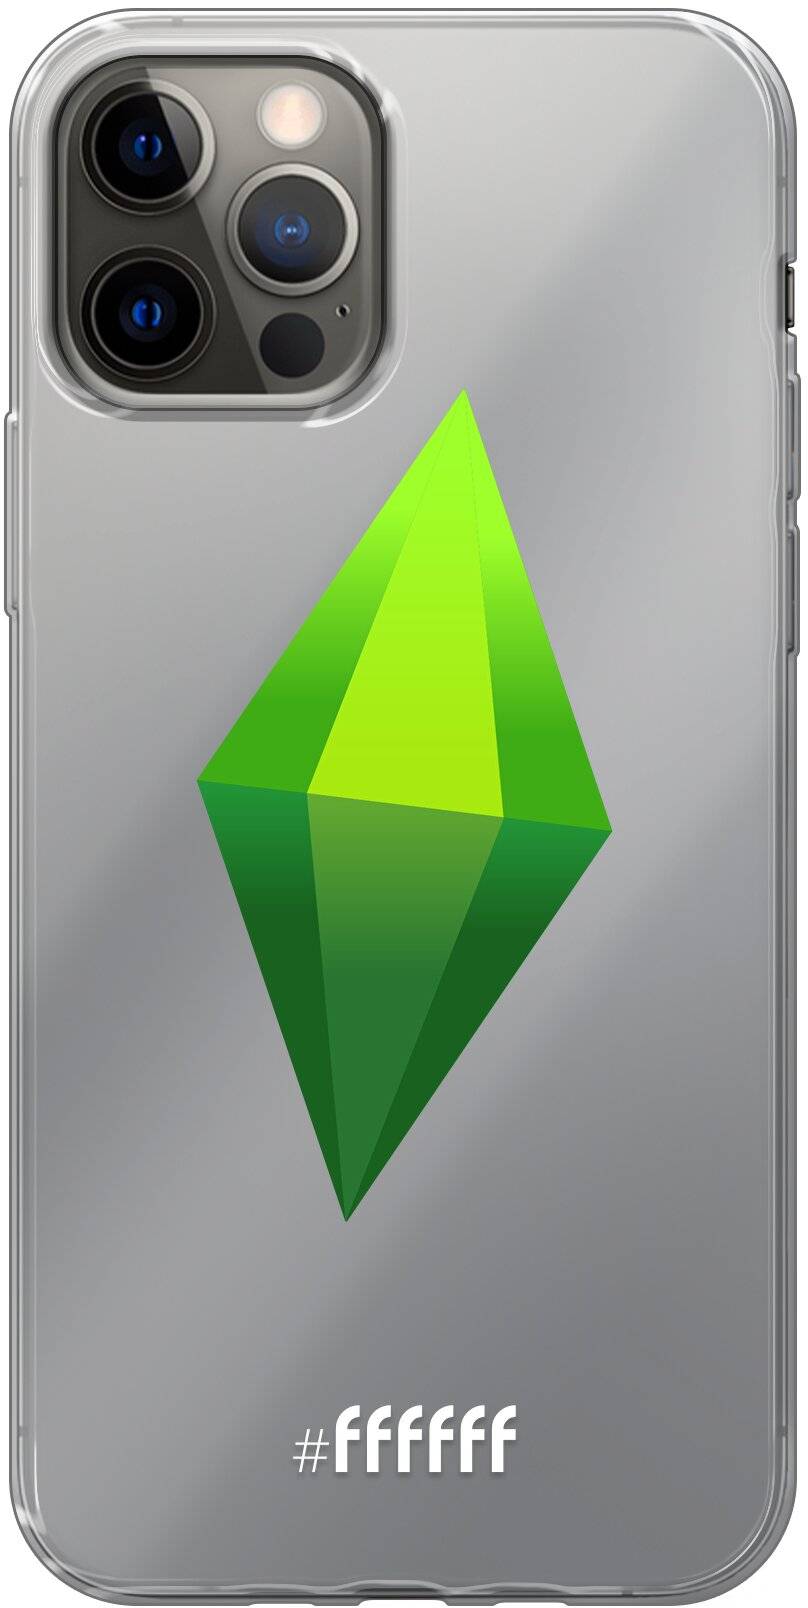 The Sims iPhone 12 Pro